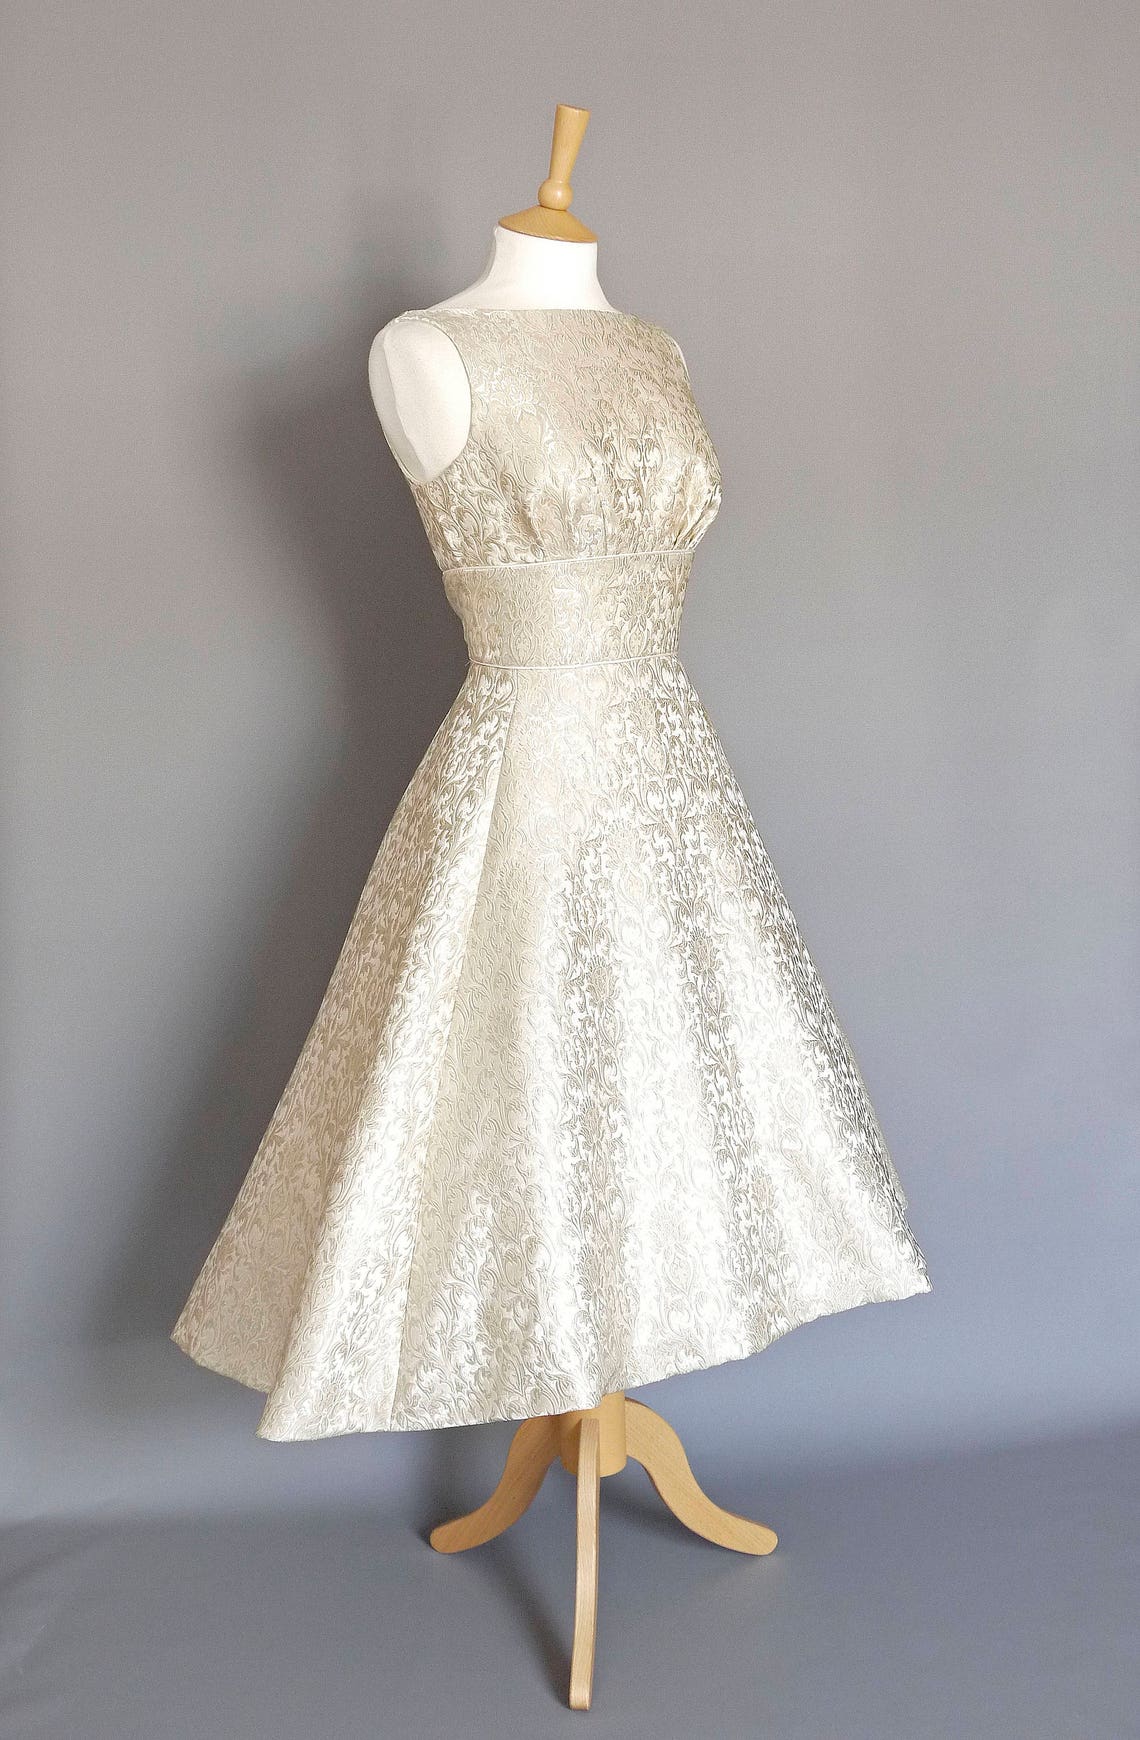 Silver and Pearl Brocade Tiffany Wedding Dress With Dipped Hem - Etsy